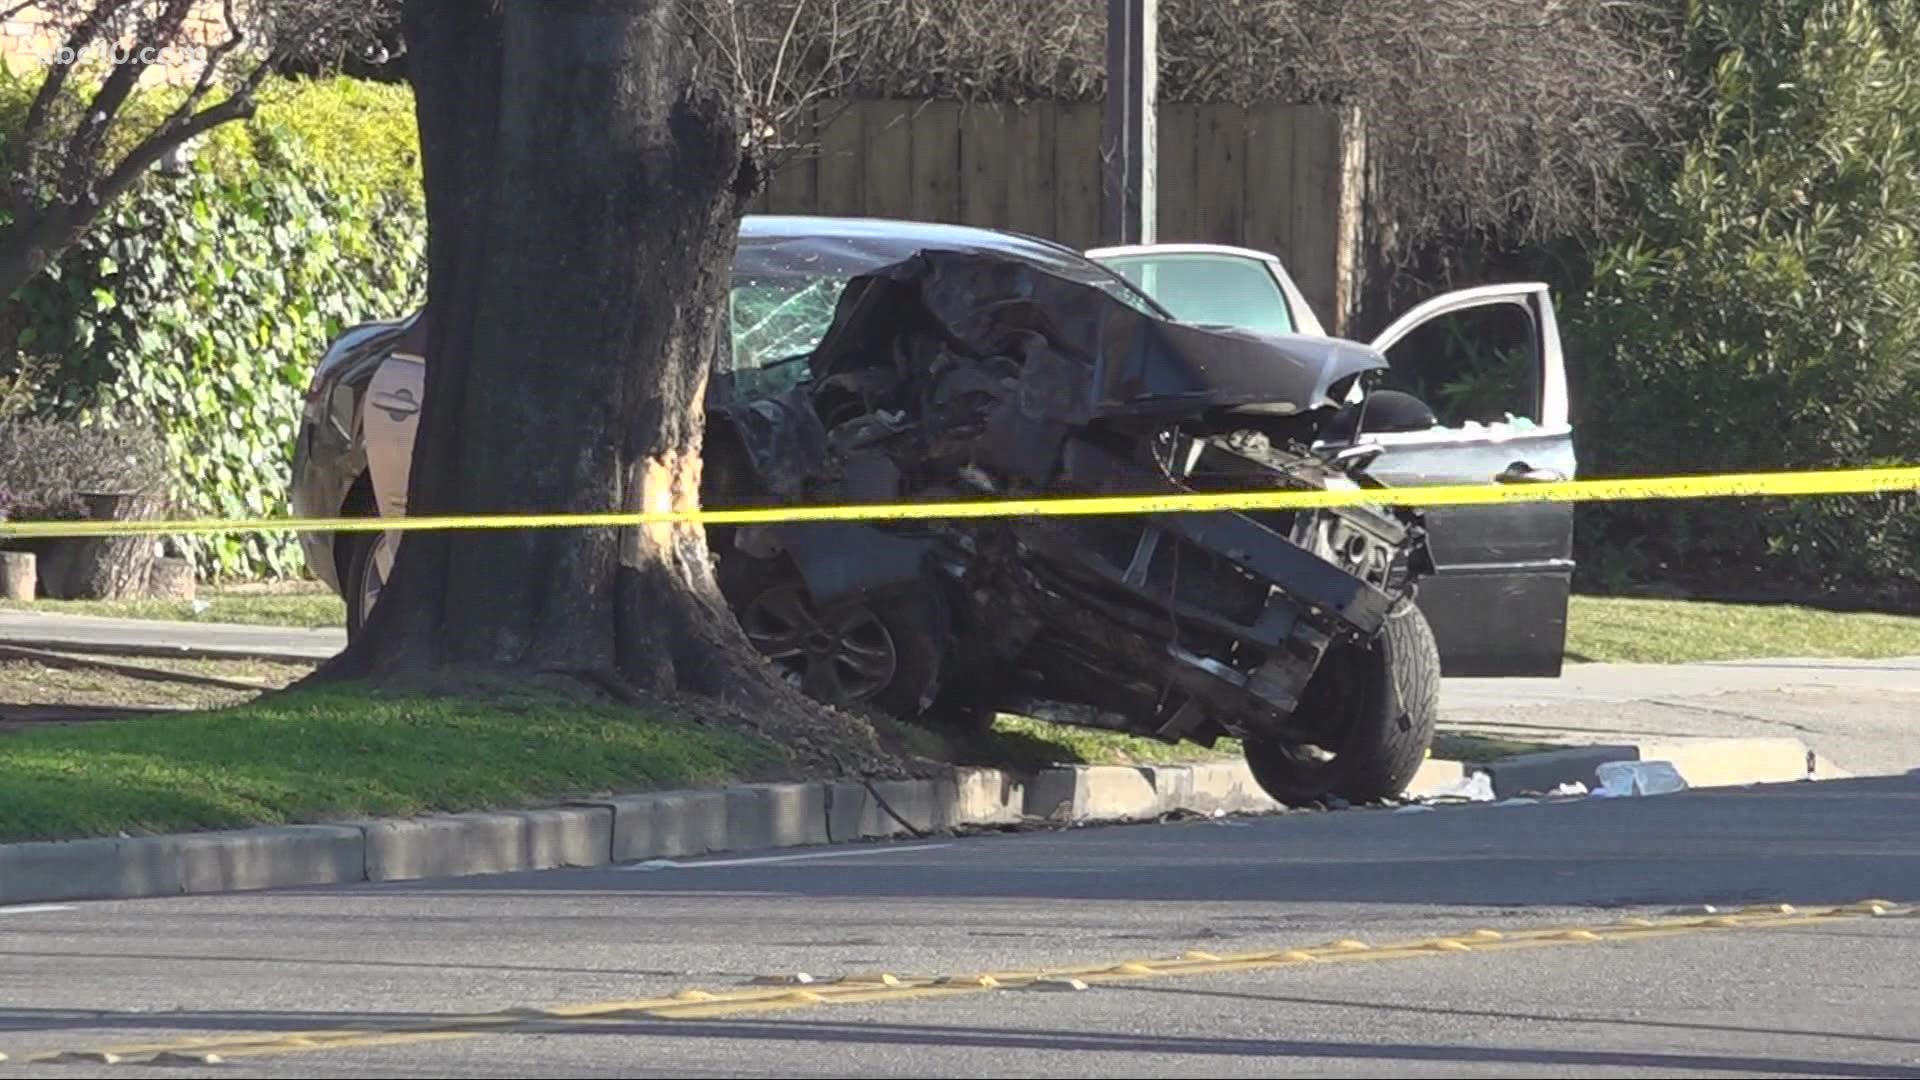 The driver identified by police as 42-year-old Waldric Earvin, of Stockton, initially pulled over, but then attempted to flee.